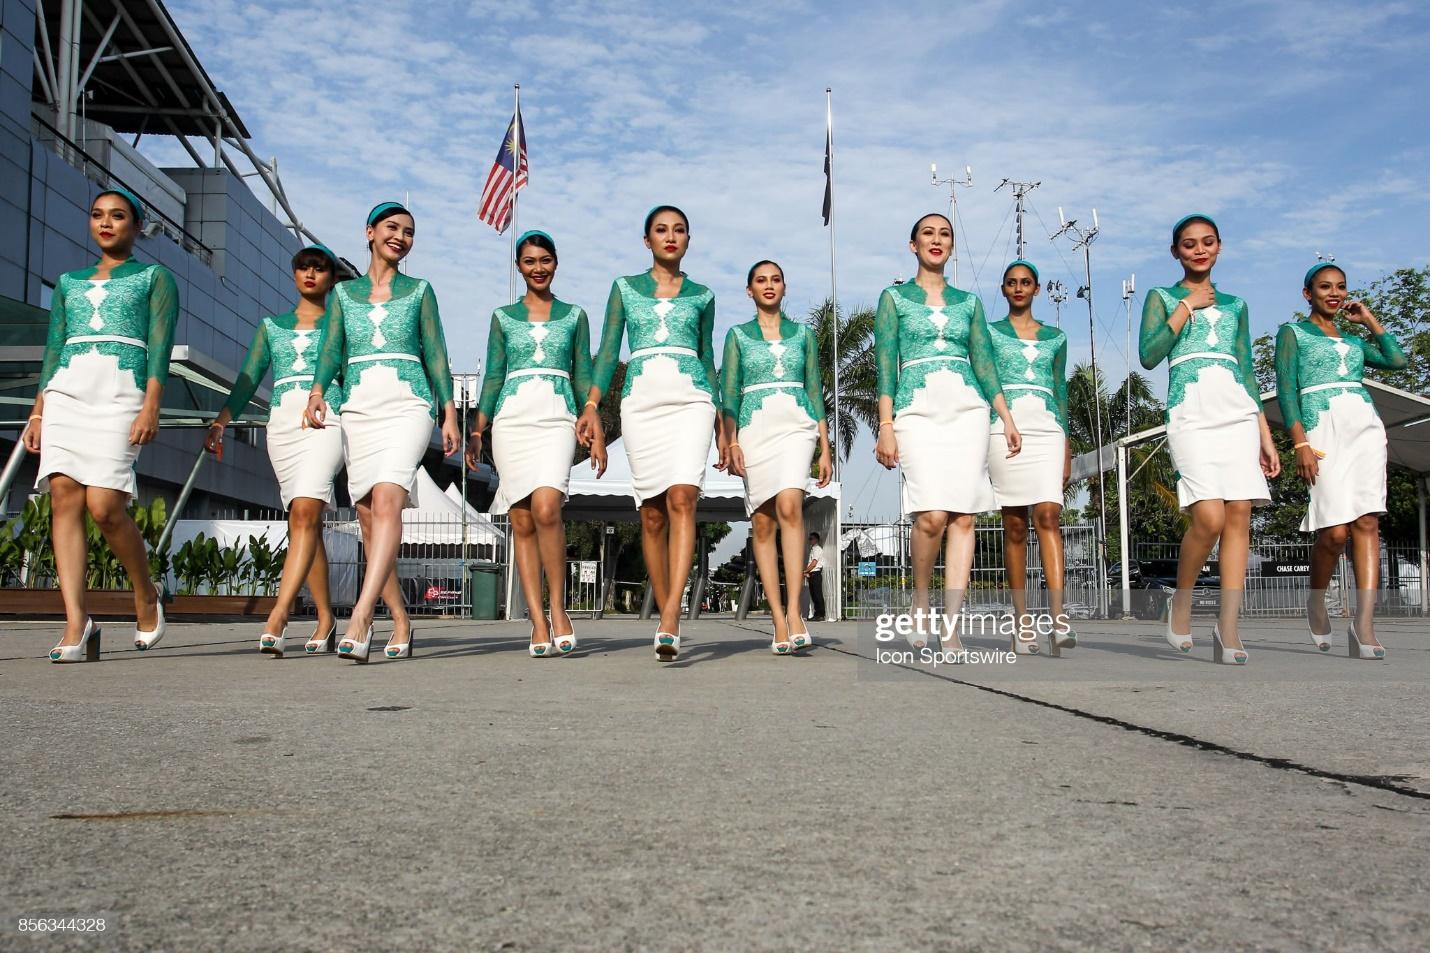 D:\Documenti\posts\posts\Women and motorsport\foto\Getty e altre\grid-girls-pose-for-photograph-before-the-start-of-the-race-of-the-1-picture-id856344328.jpg